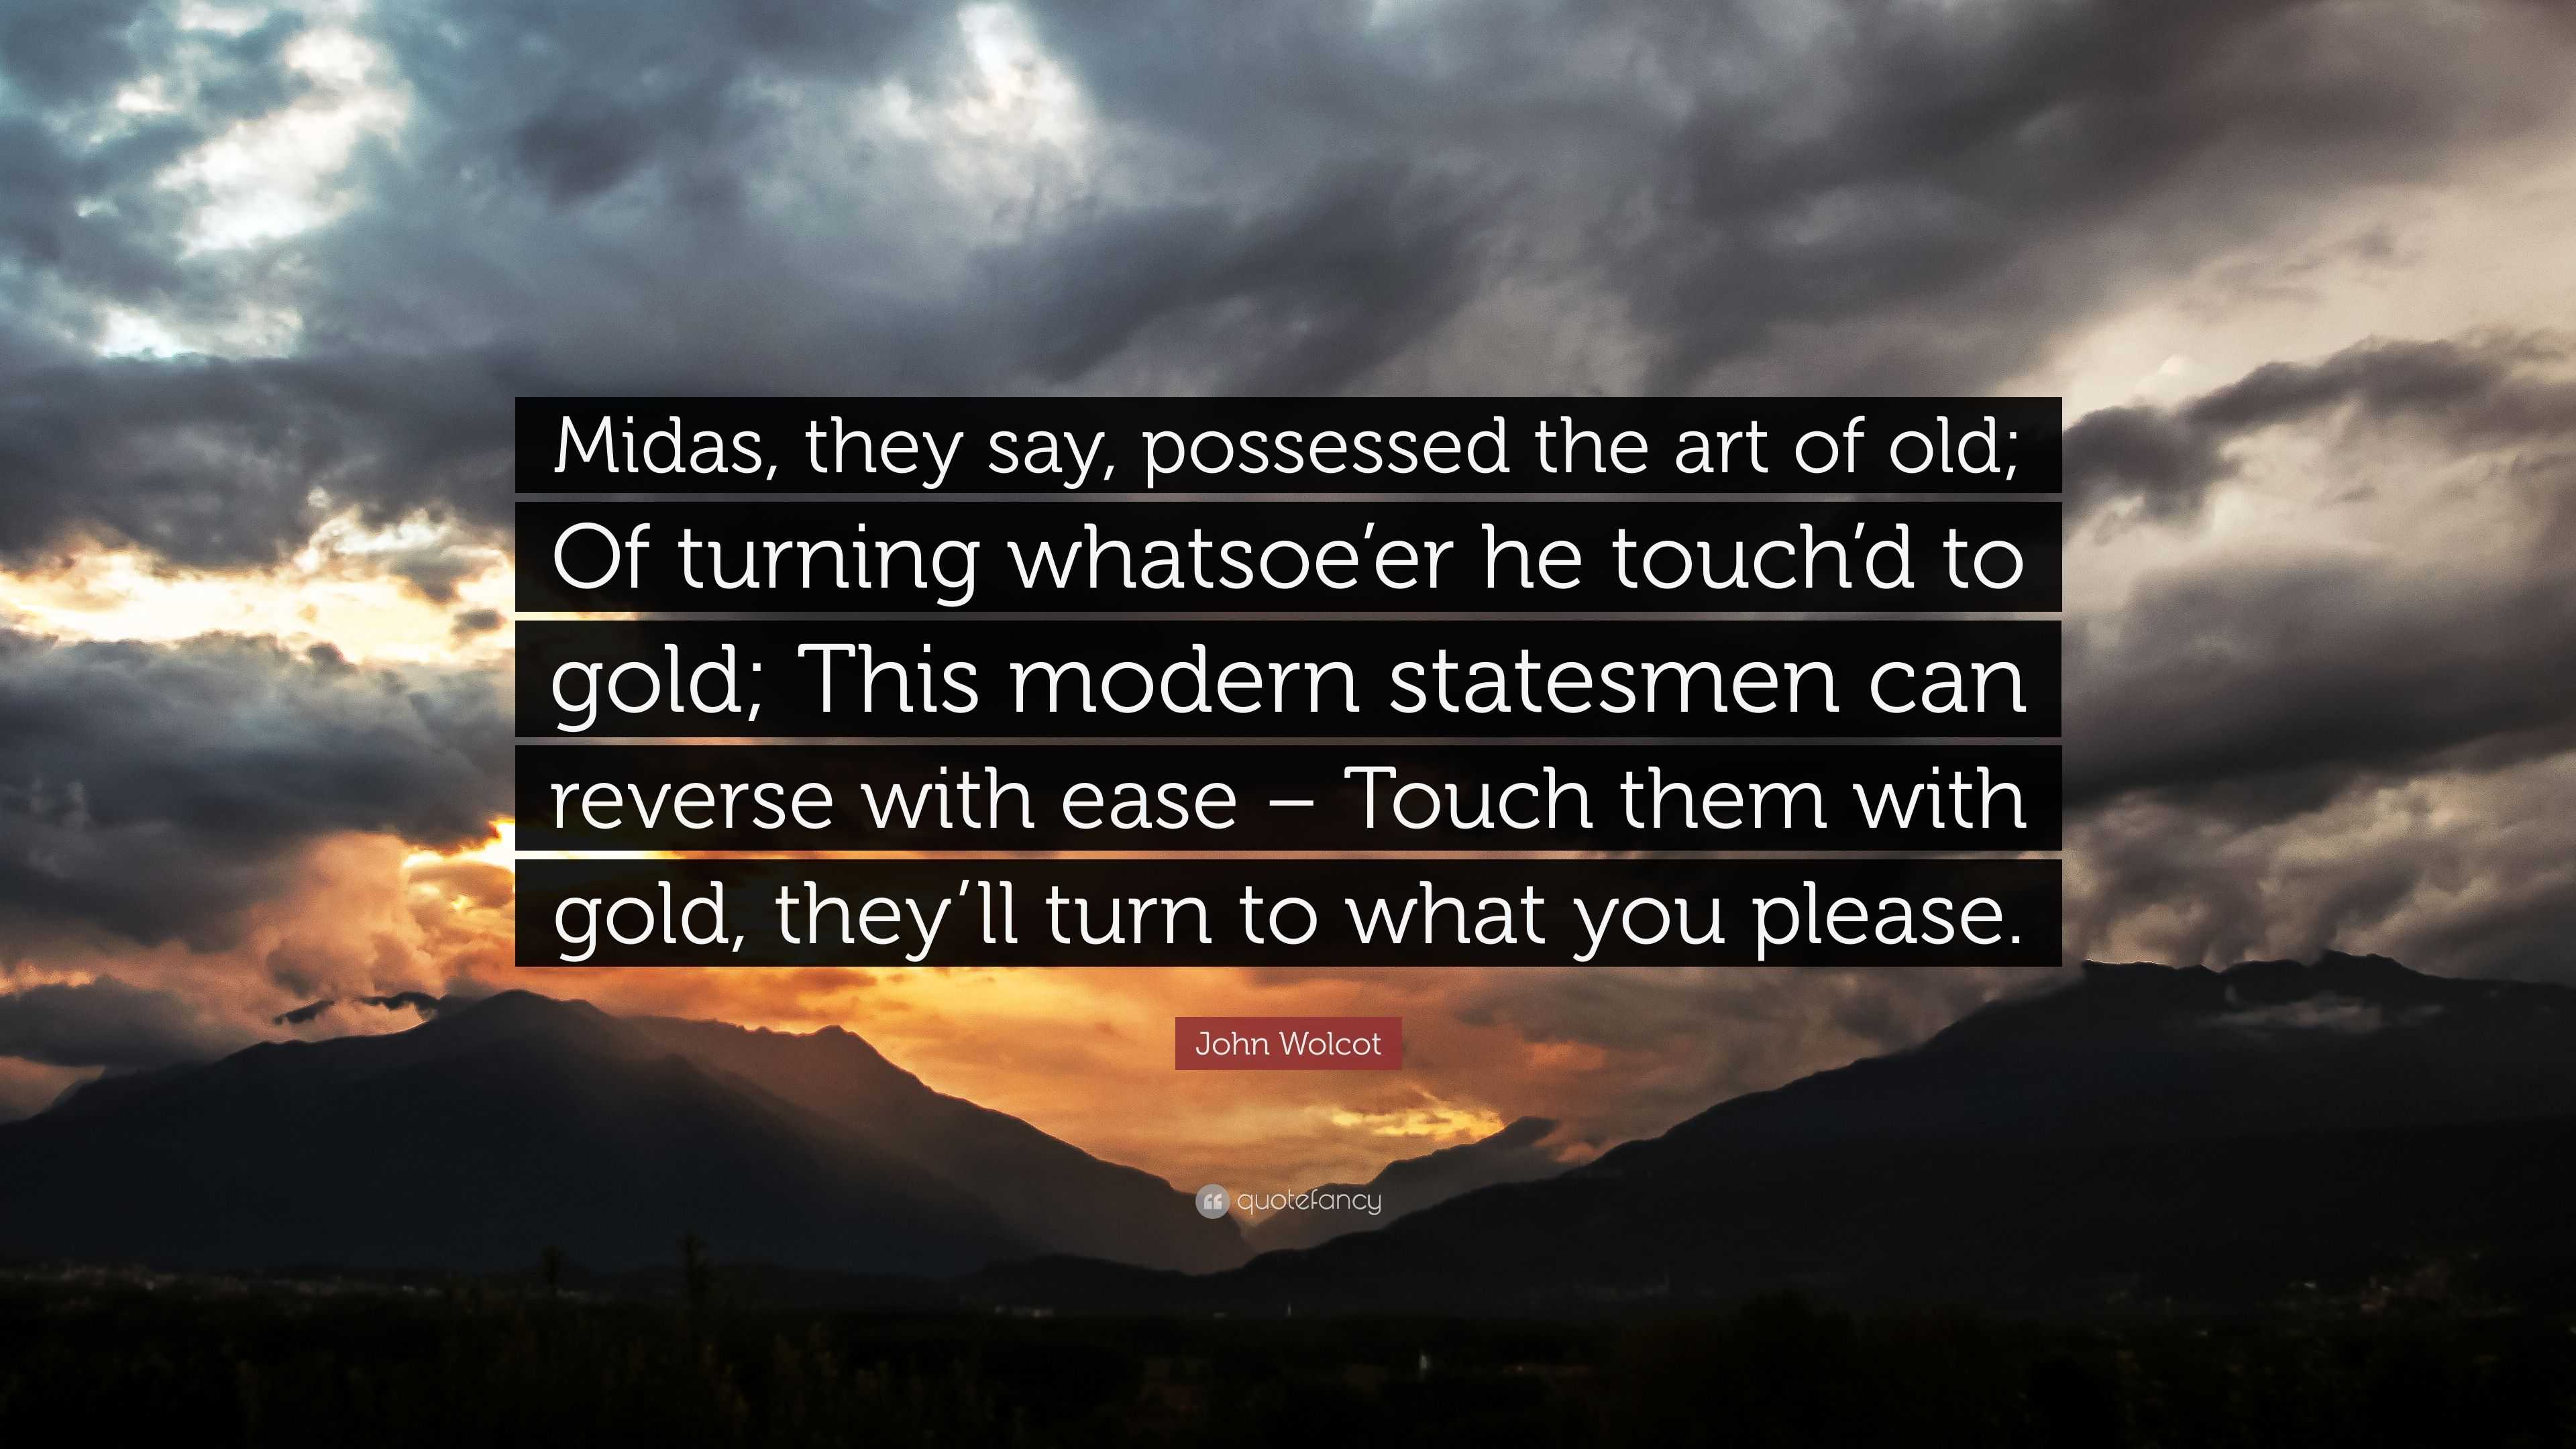 John Wolcot Quote: “Midas, they say, possessed the art of old; Of turning  whatsoe'er he touch'd to gold; This modern statesmen can reverse w”